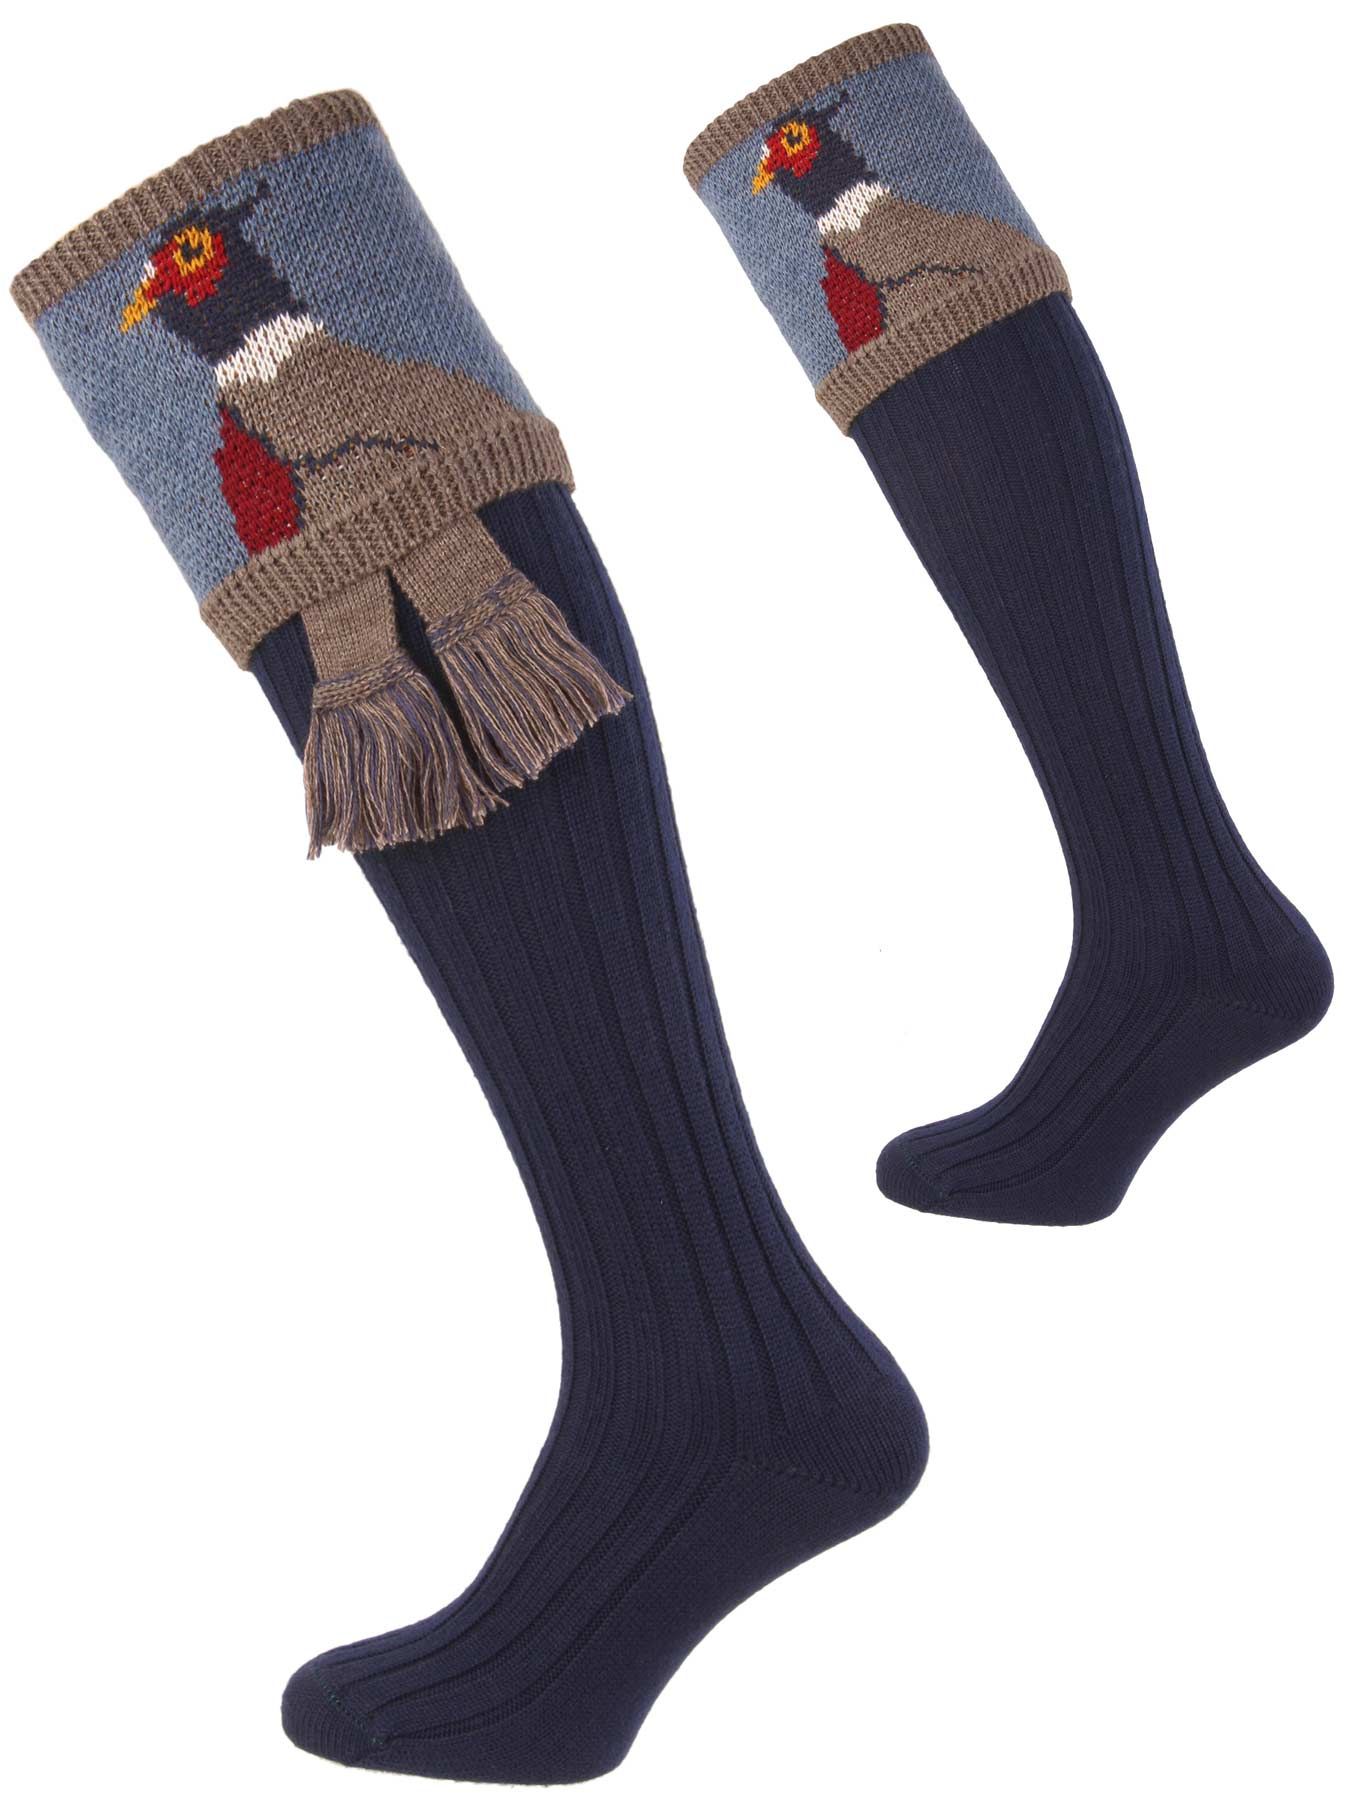 EXTRA LONG GAME SHOOTING BREEK WELLY SOCKS & GARTERS WITH EMBROIDERED PHEASANT